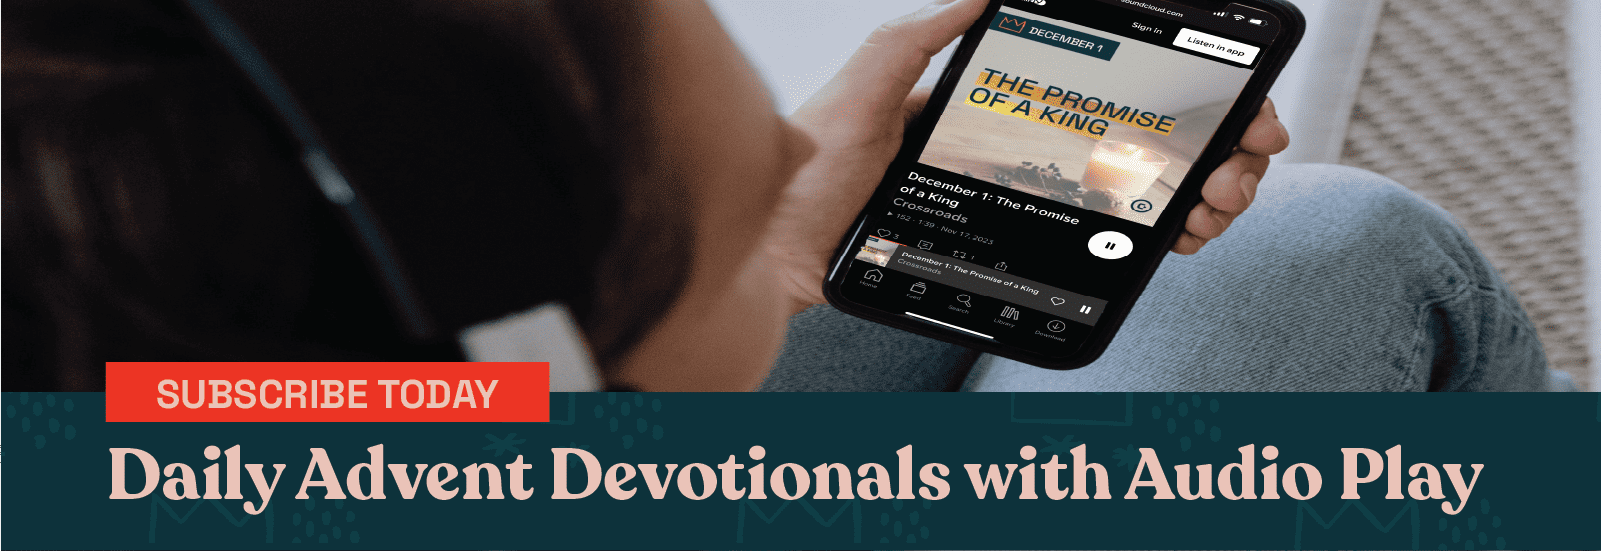 Daily Advent Devotionals